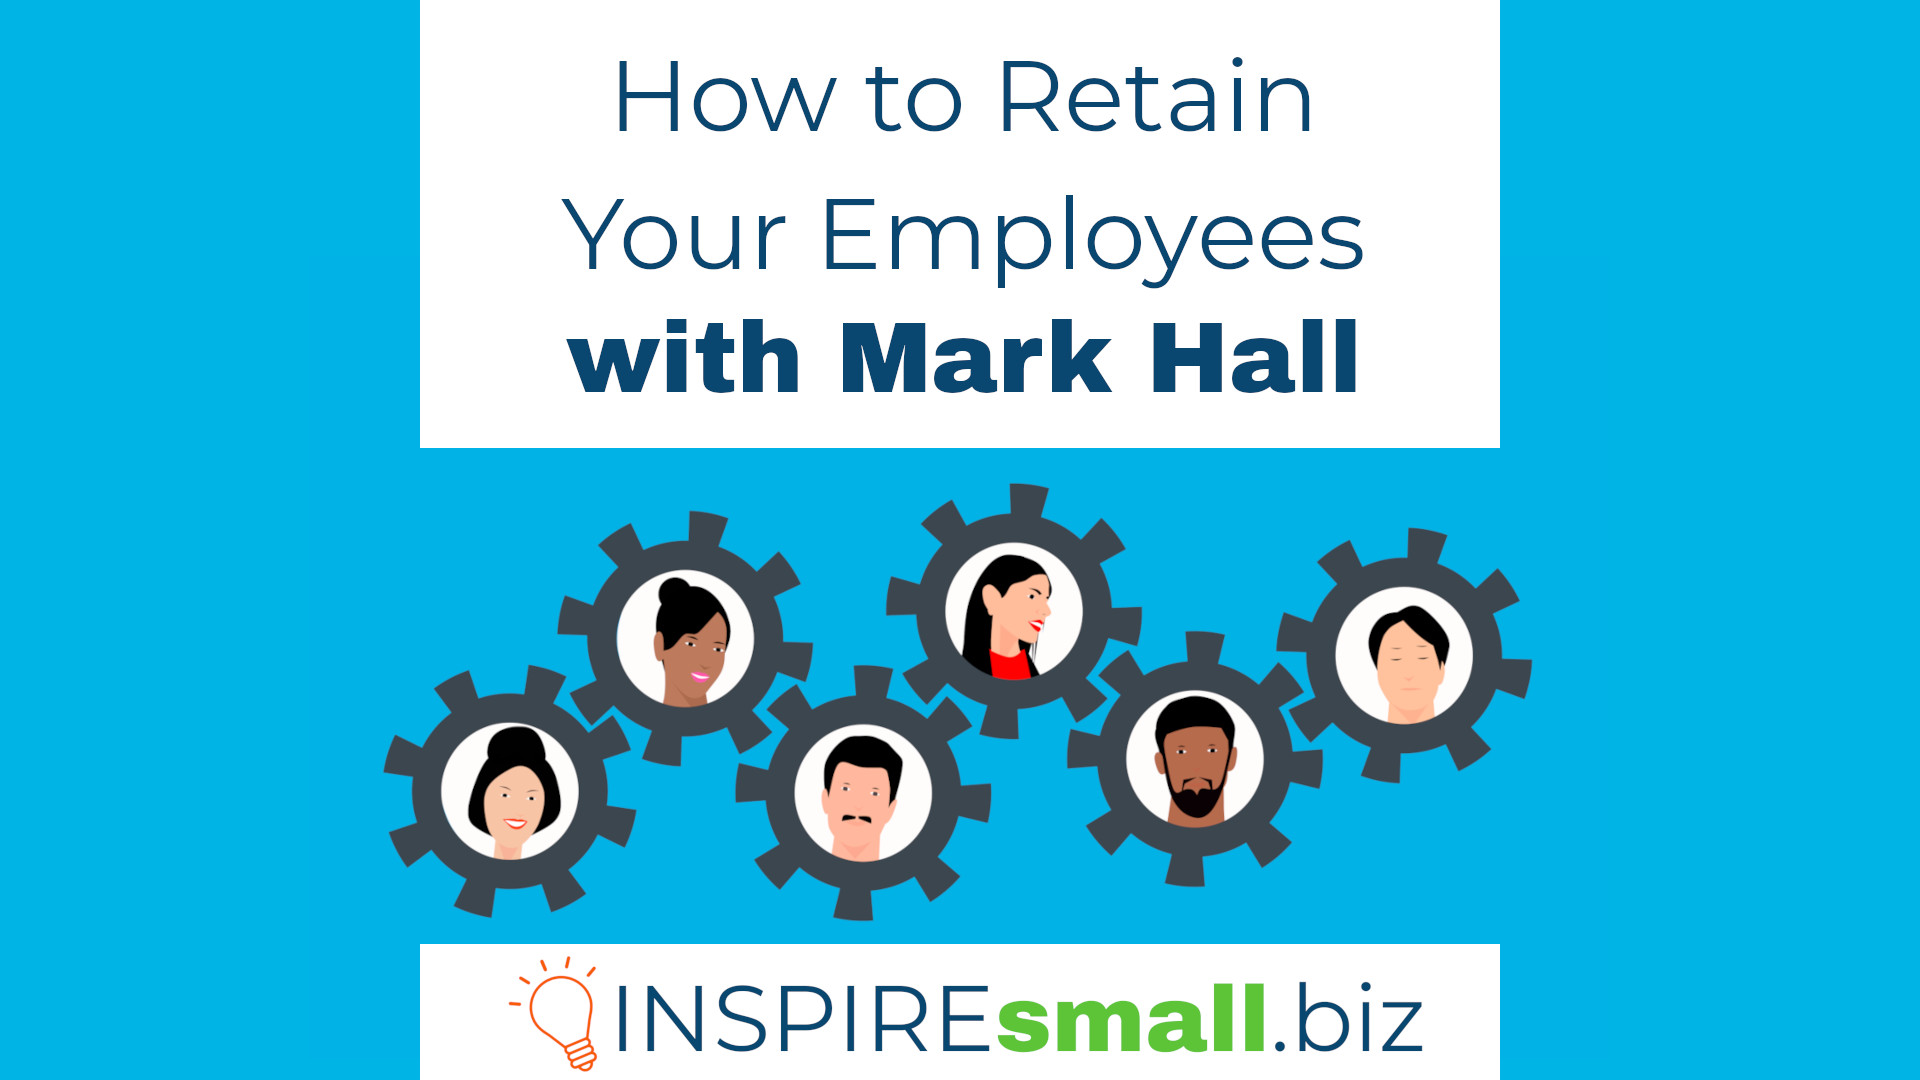 How to Retain Your Employees with Mark Hall, hosted by INSPIREsmall.biz. The image features 6 people inset in gray gears, over a light blue background.